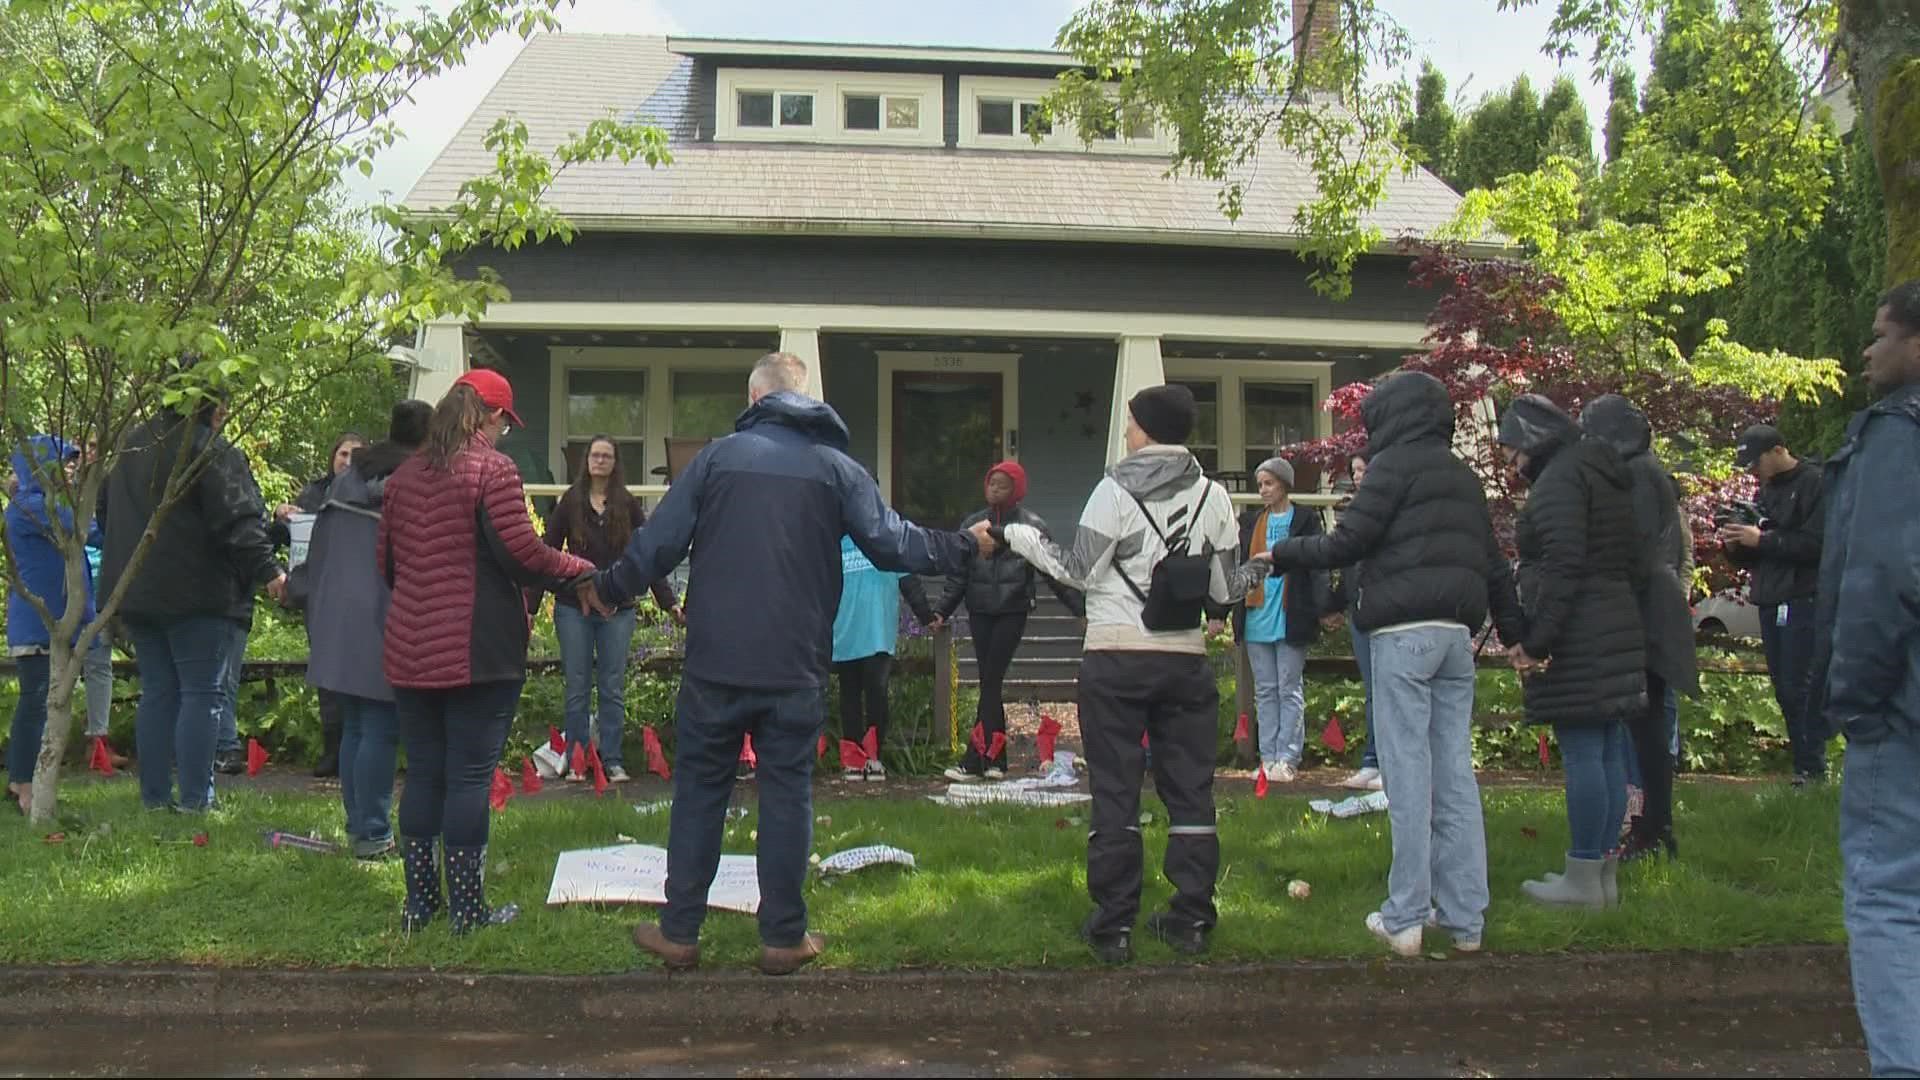 The peaceful demonstration was part of an afternoon gathering on Mother's Day demanding the state address the ongoing opioid crisis in Oregon.